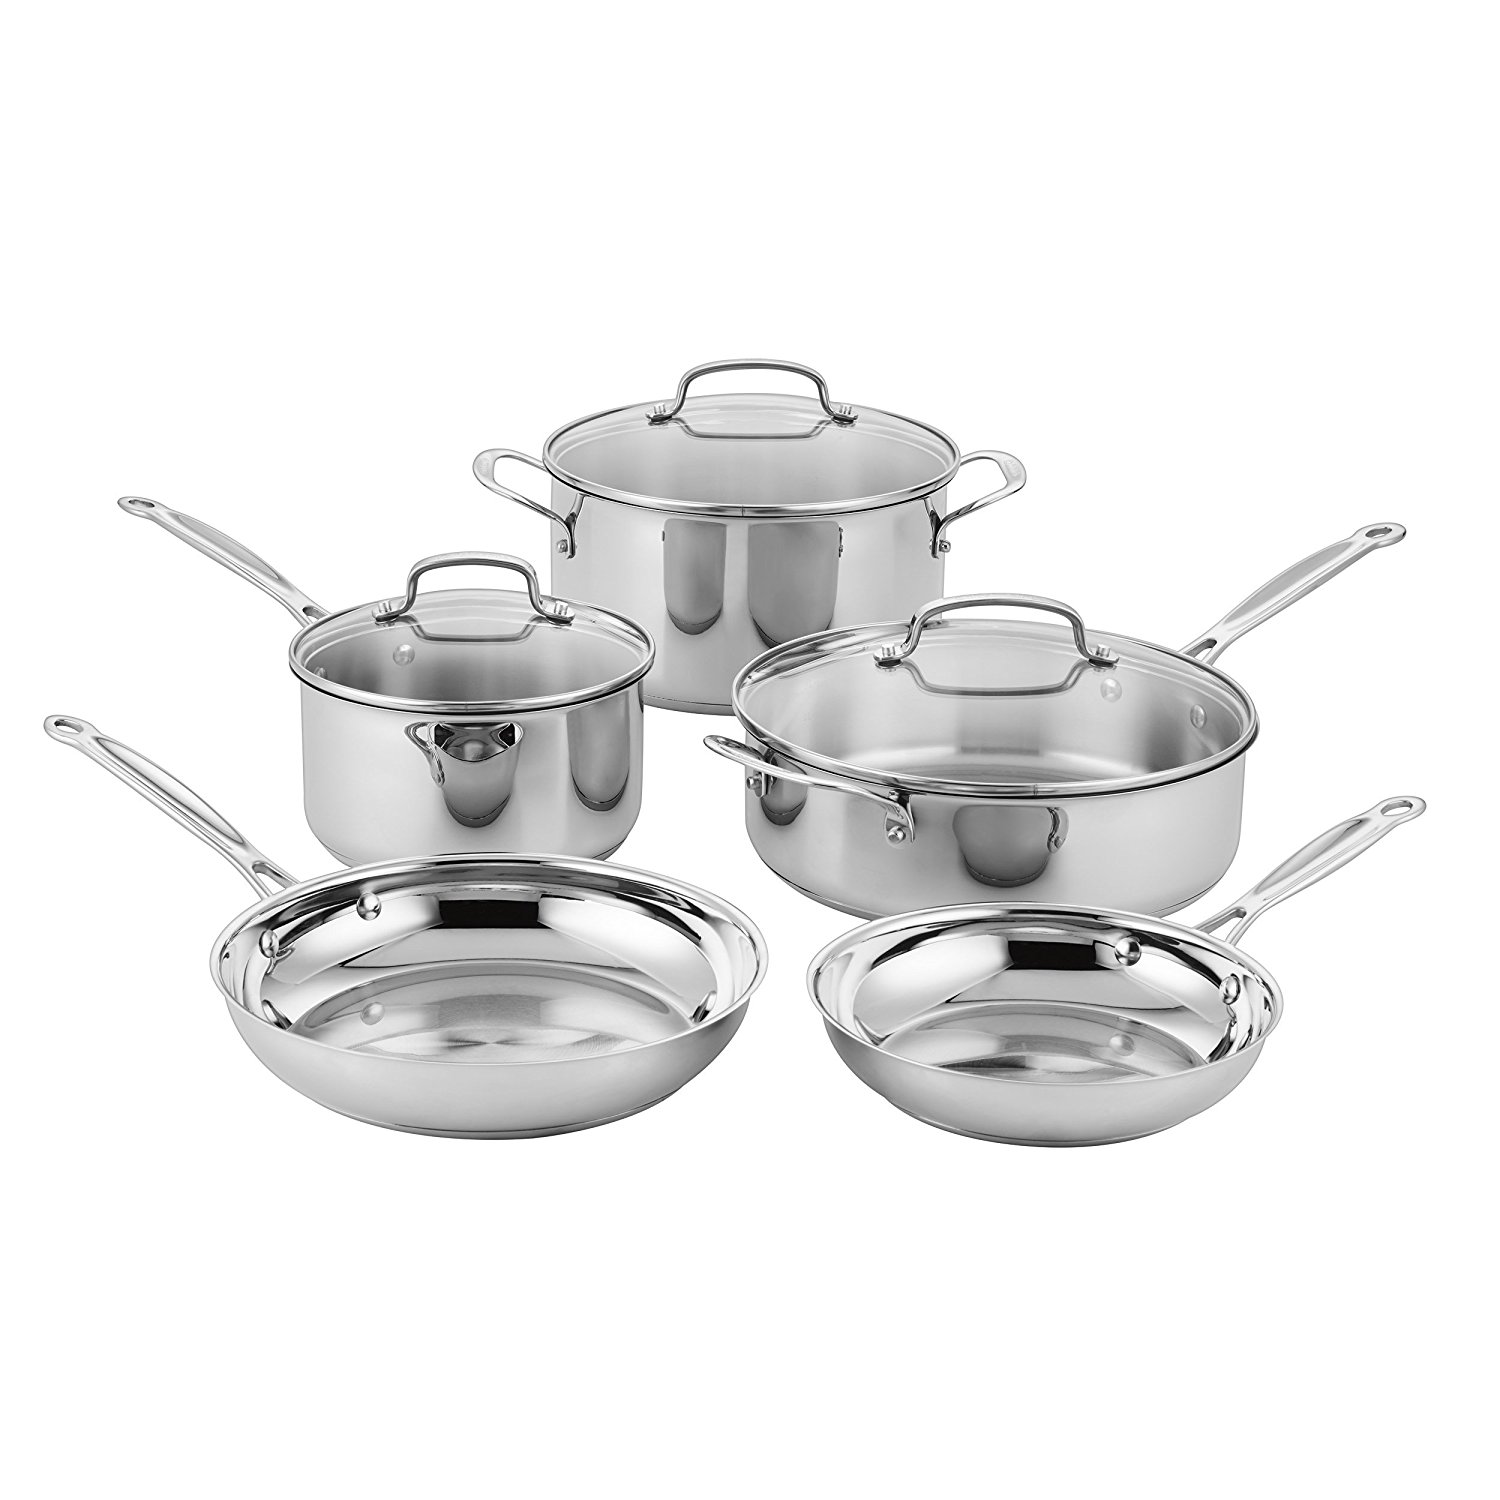 Today only: Cuisinart Classic 8-piece stainless steel cookware set for $99